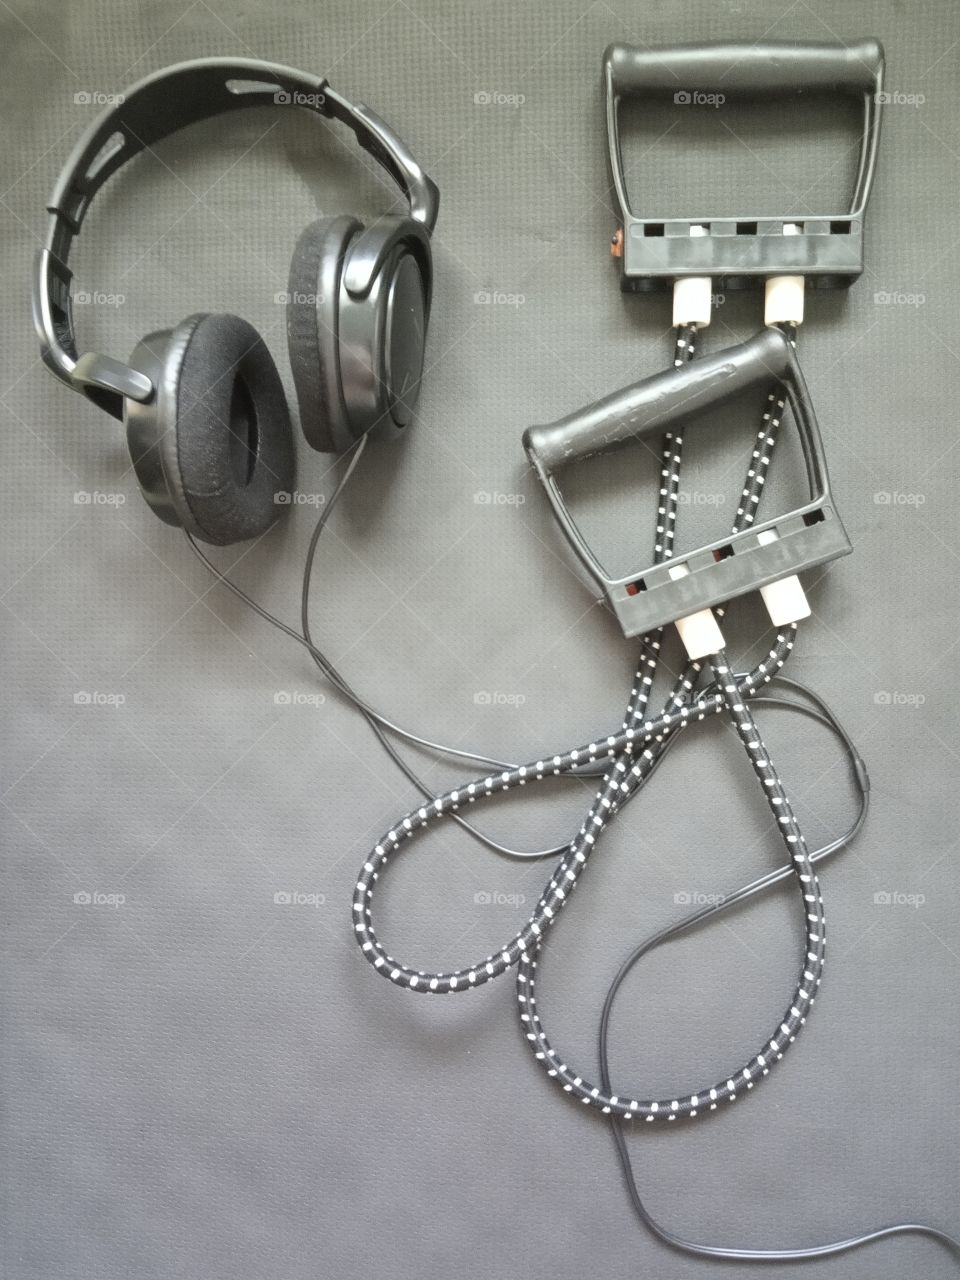 Interesting black and grey arrangement of earphones and sport equipment, depicting love for music and sport.